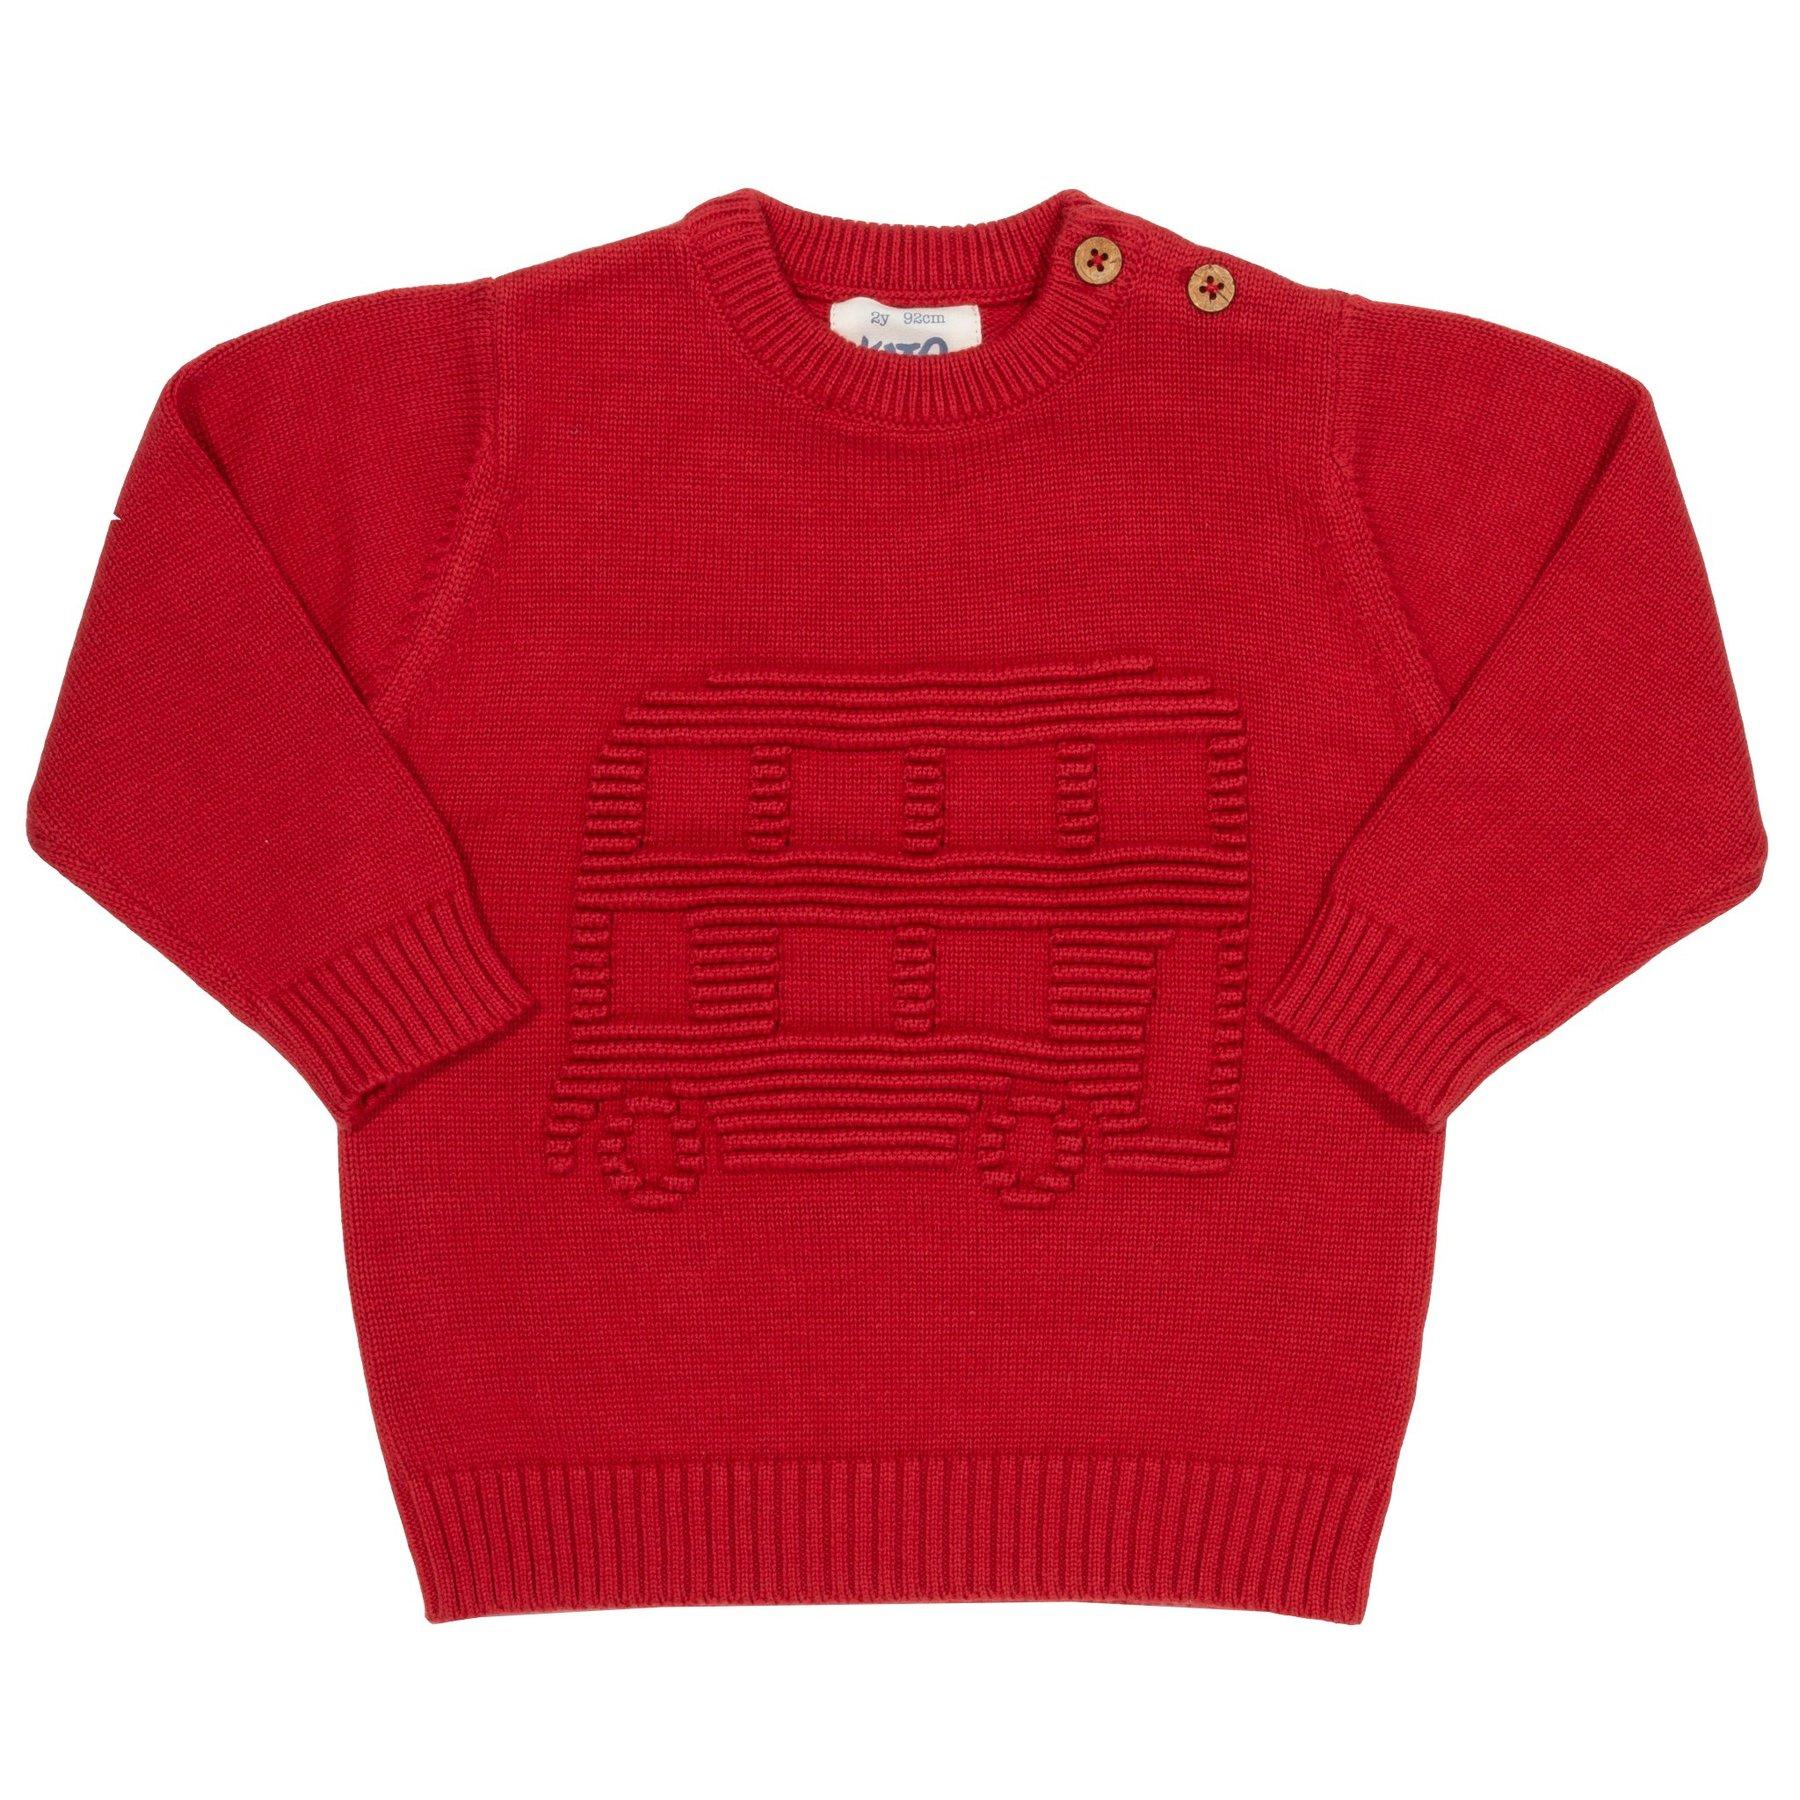 Kite Clothing big red bus jumper front